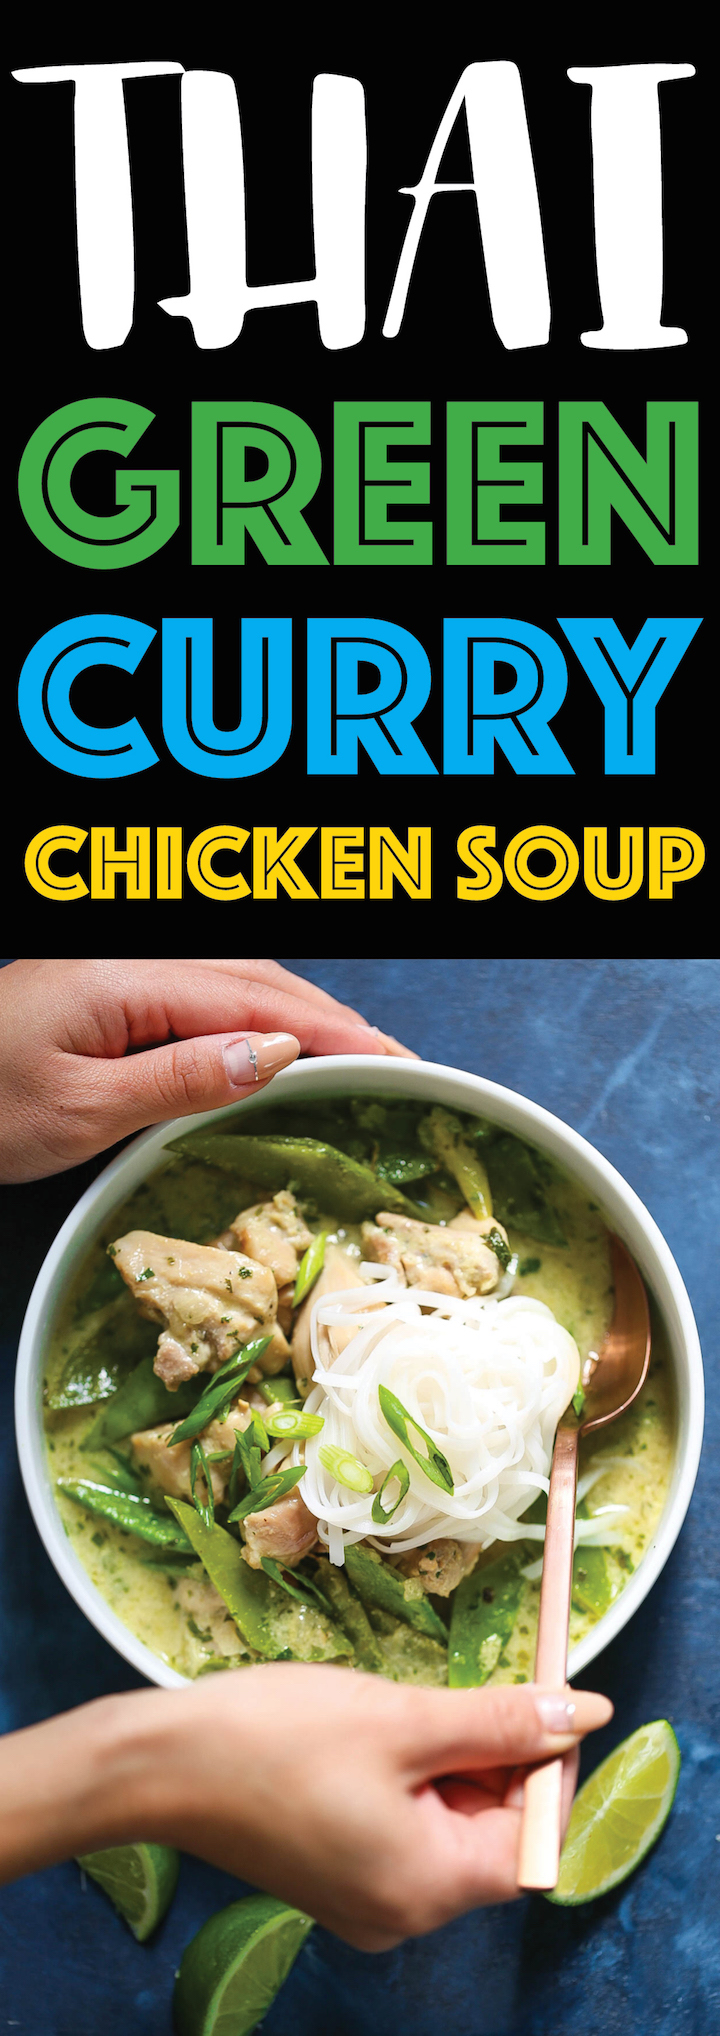 Thai Green Curry Chicken Soup - Everyone’s favorite Thai green curry can be made right at home into the coziest, most comforting chicken soup ever! It is so easy to make with easy-to-find ingredients, loaded with tender chicken bites, ginger, coconut milk, snow peas, lime juice, cilantro and rice noodles!